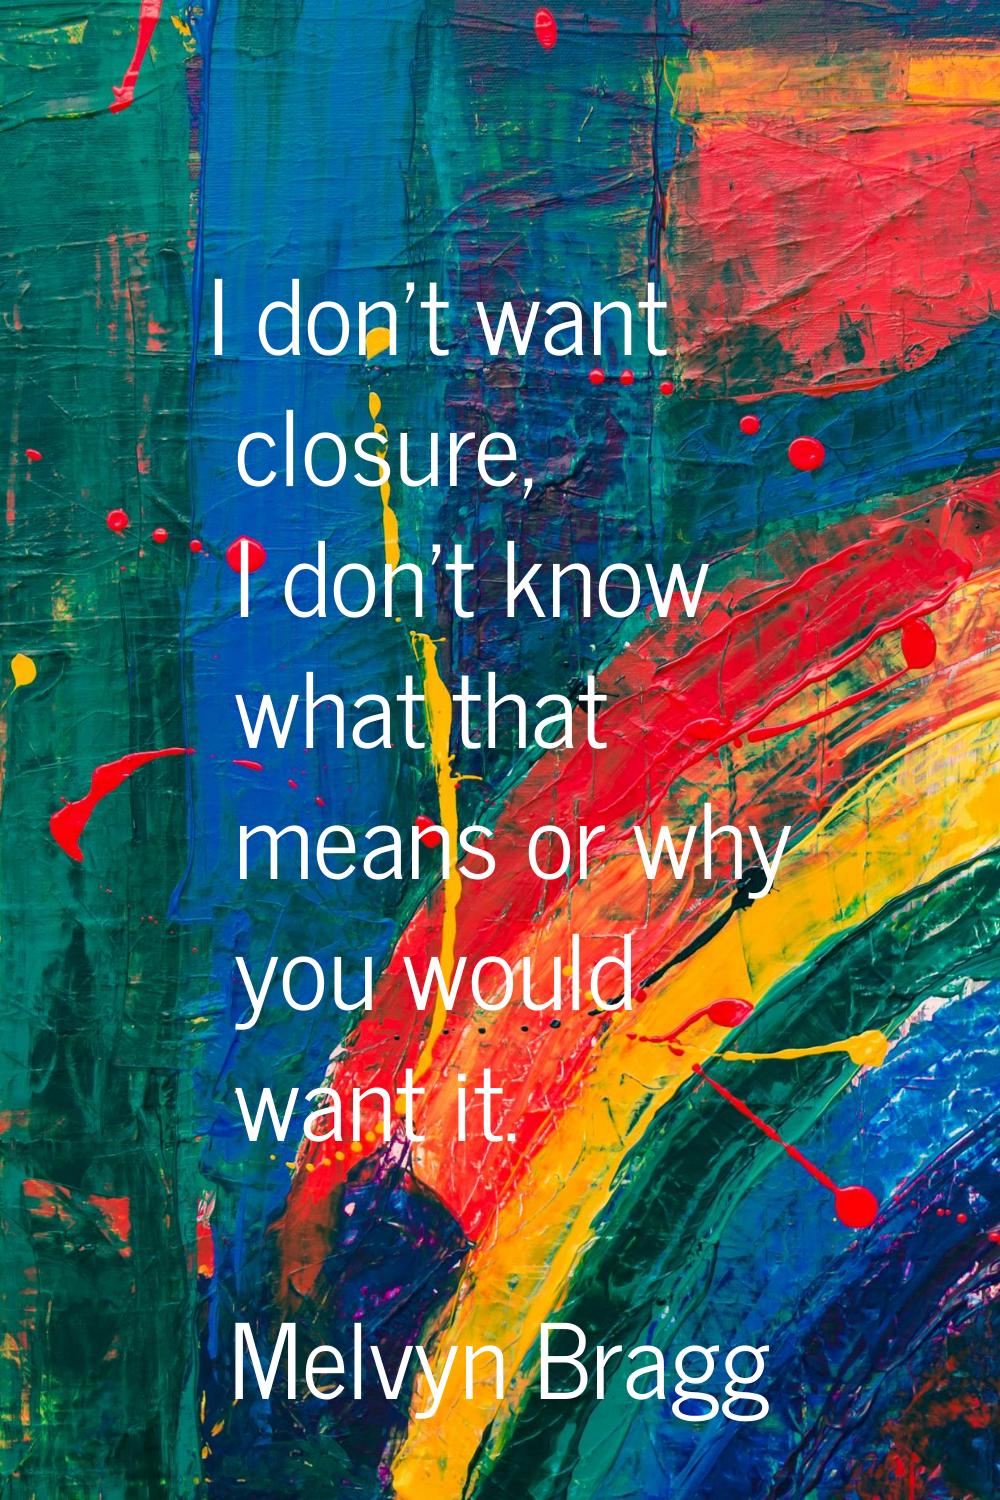 I don't want closure, I don't know what that means or why you would want it.